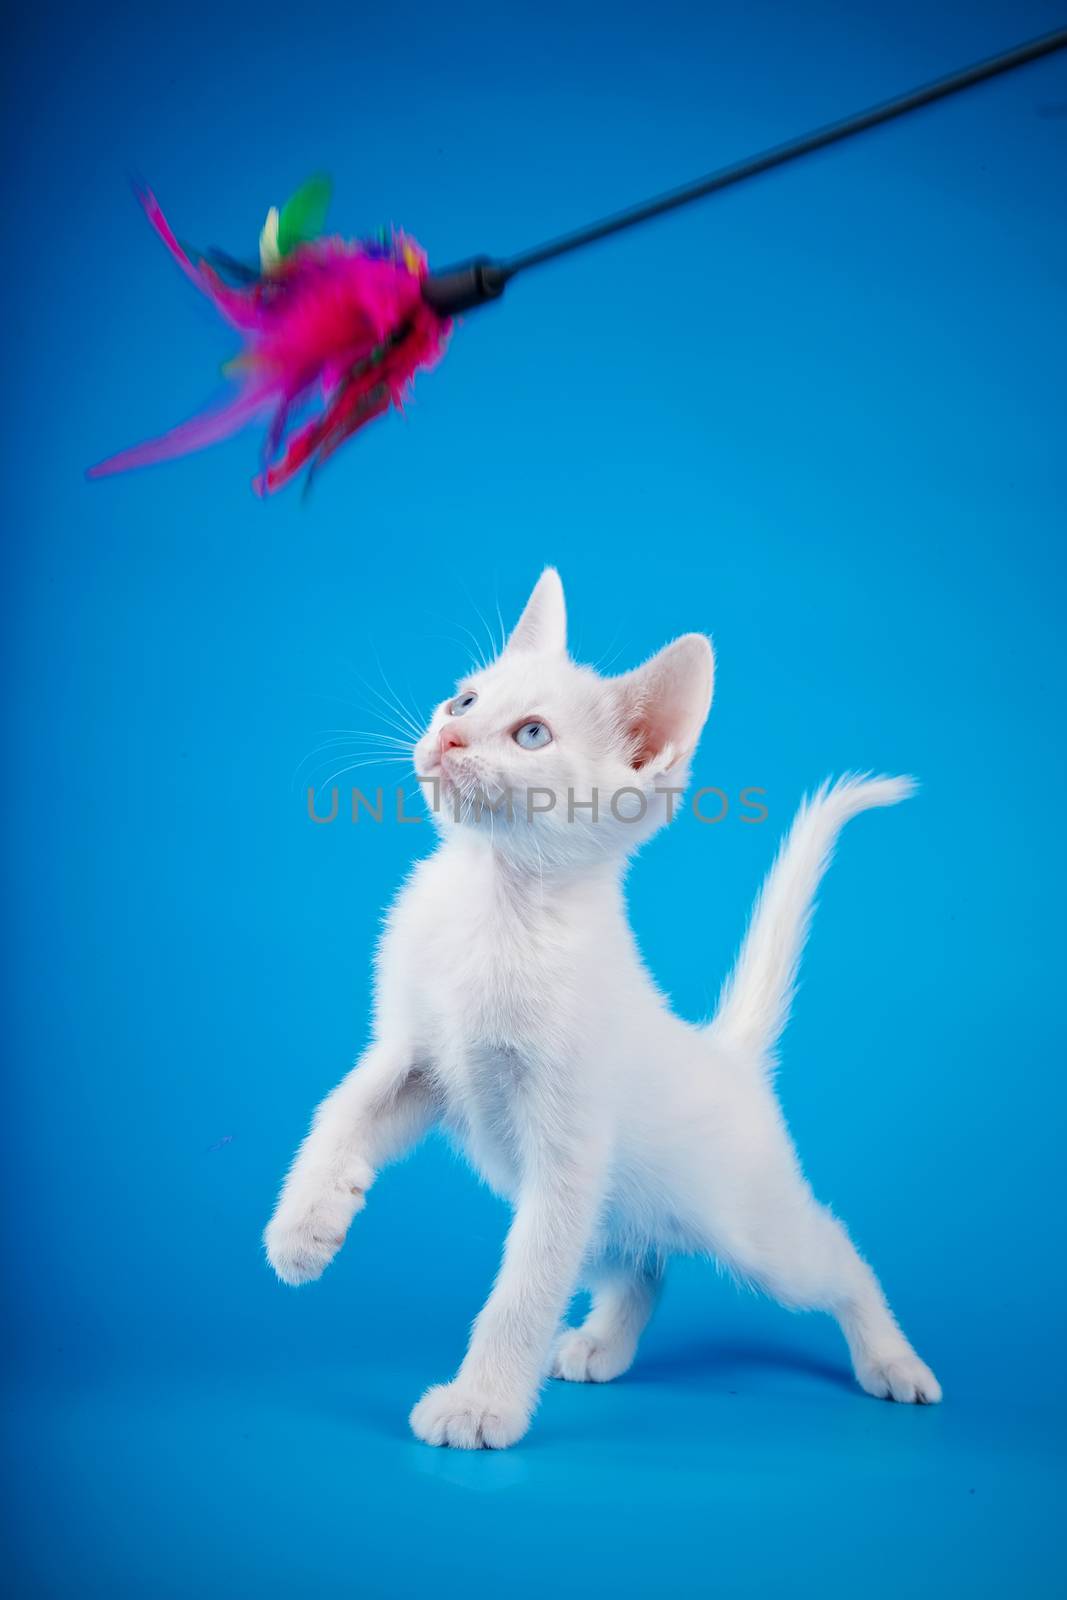 White kitten with blue eyes. Kitten on a blue background. Small predator. Small cat.